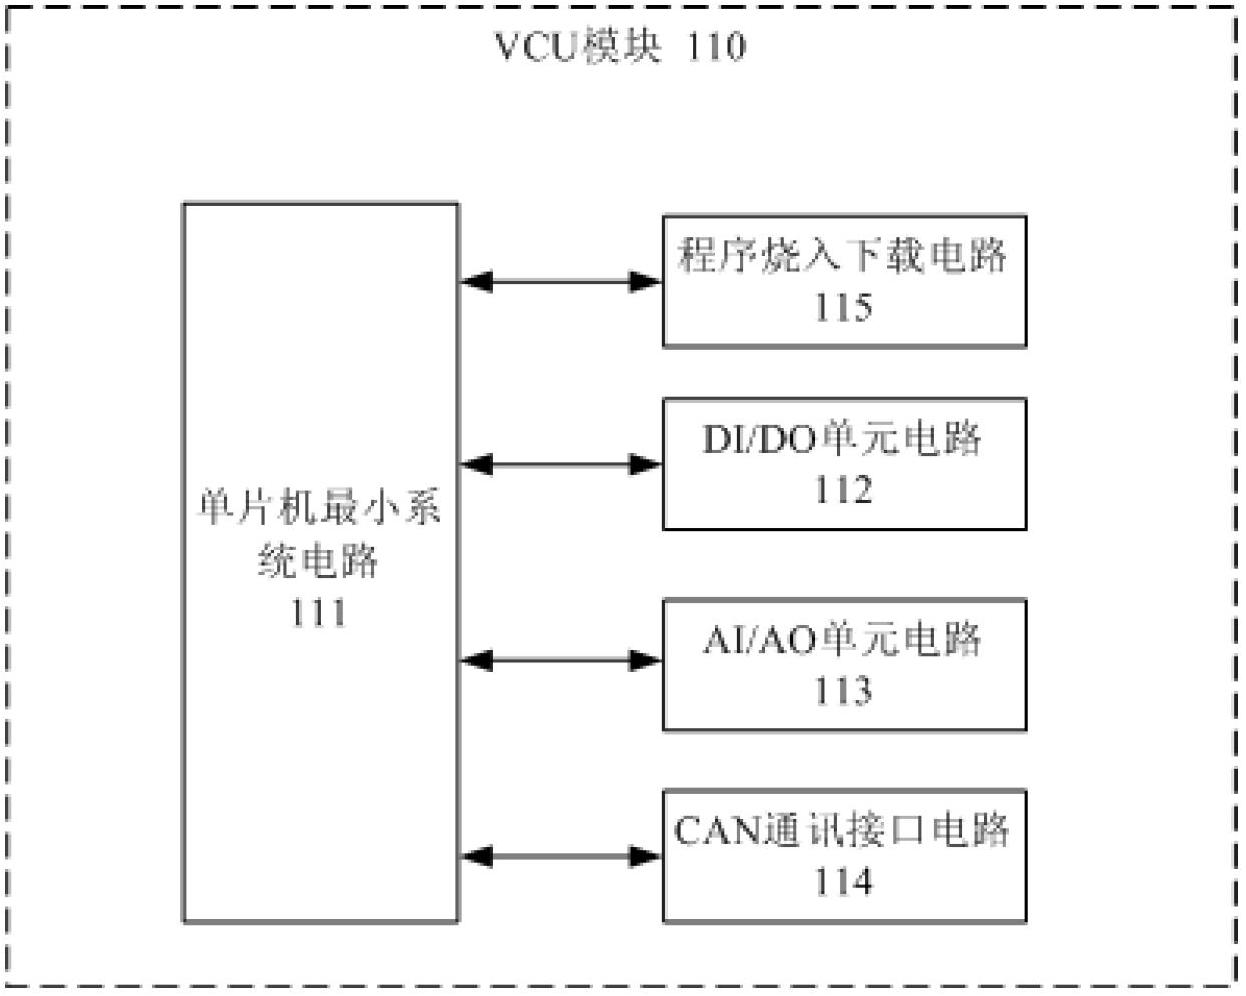 Weak-current power supply system for power control unit (PCU) of electric automobile